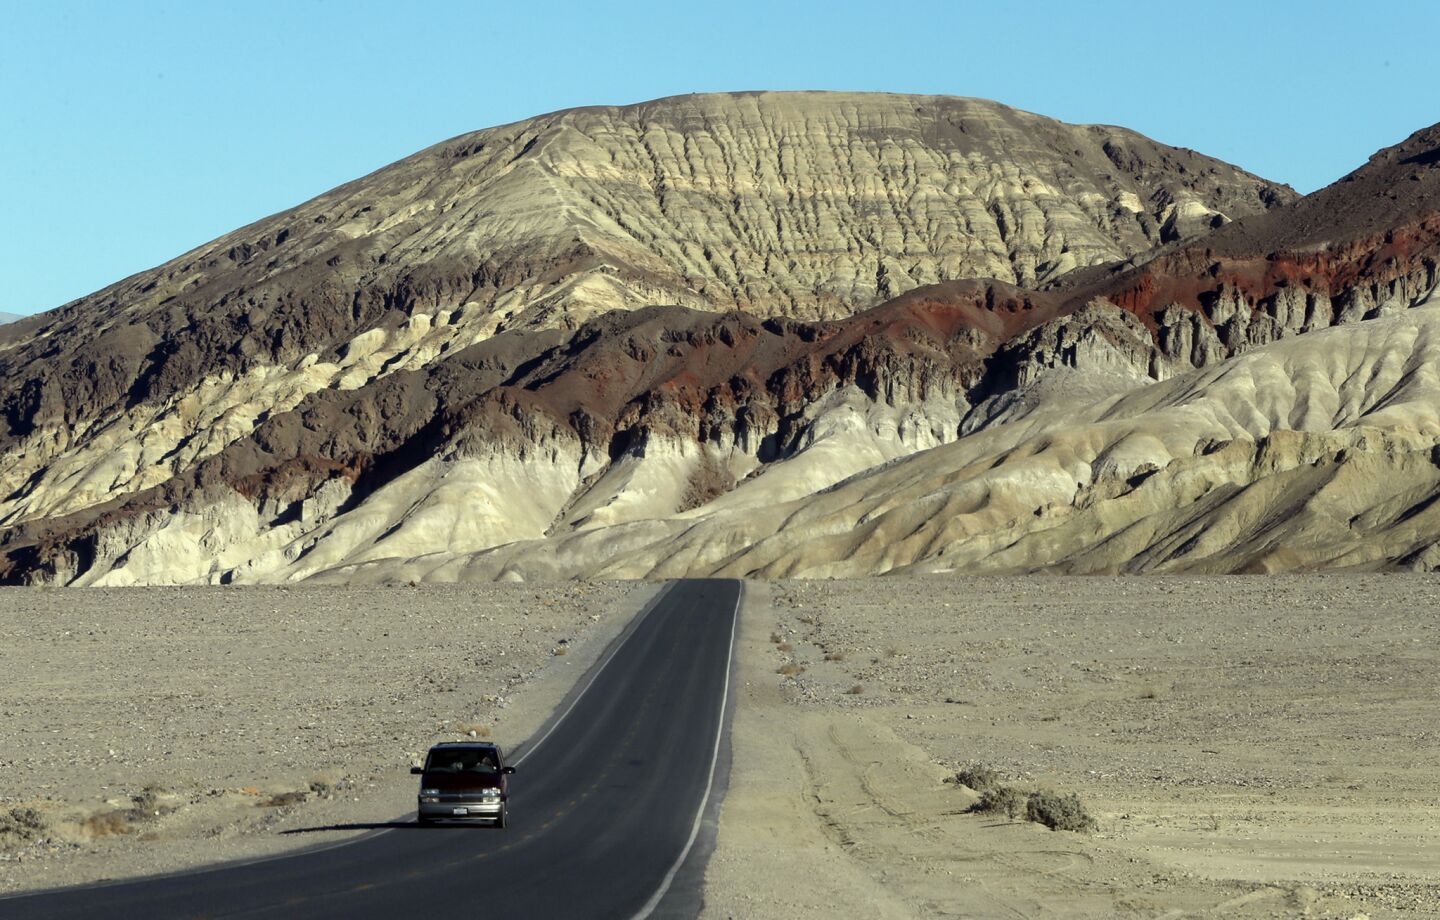 Death Valley is the largest of America's national parks, at 3.4 million acres. Visitors should have a vehicle with high clearance and lots of water.